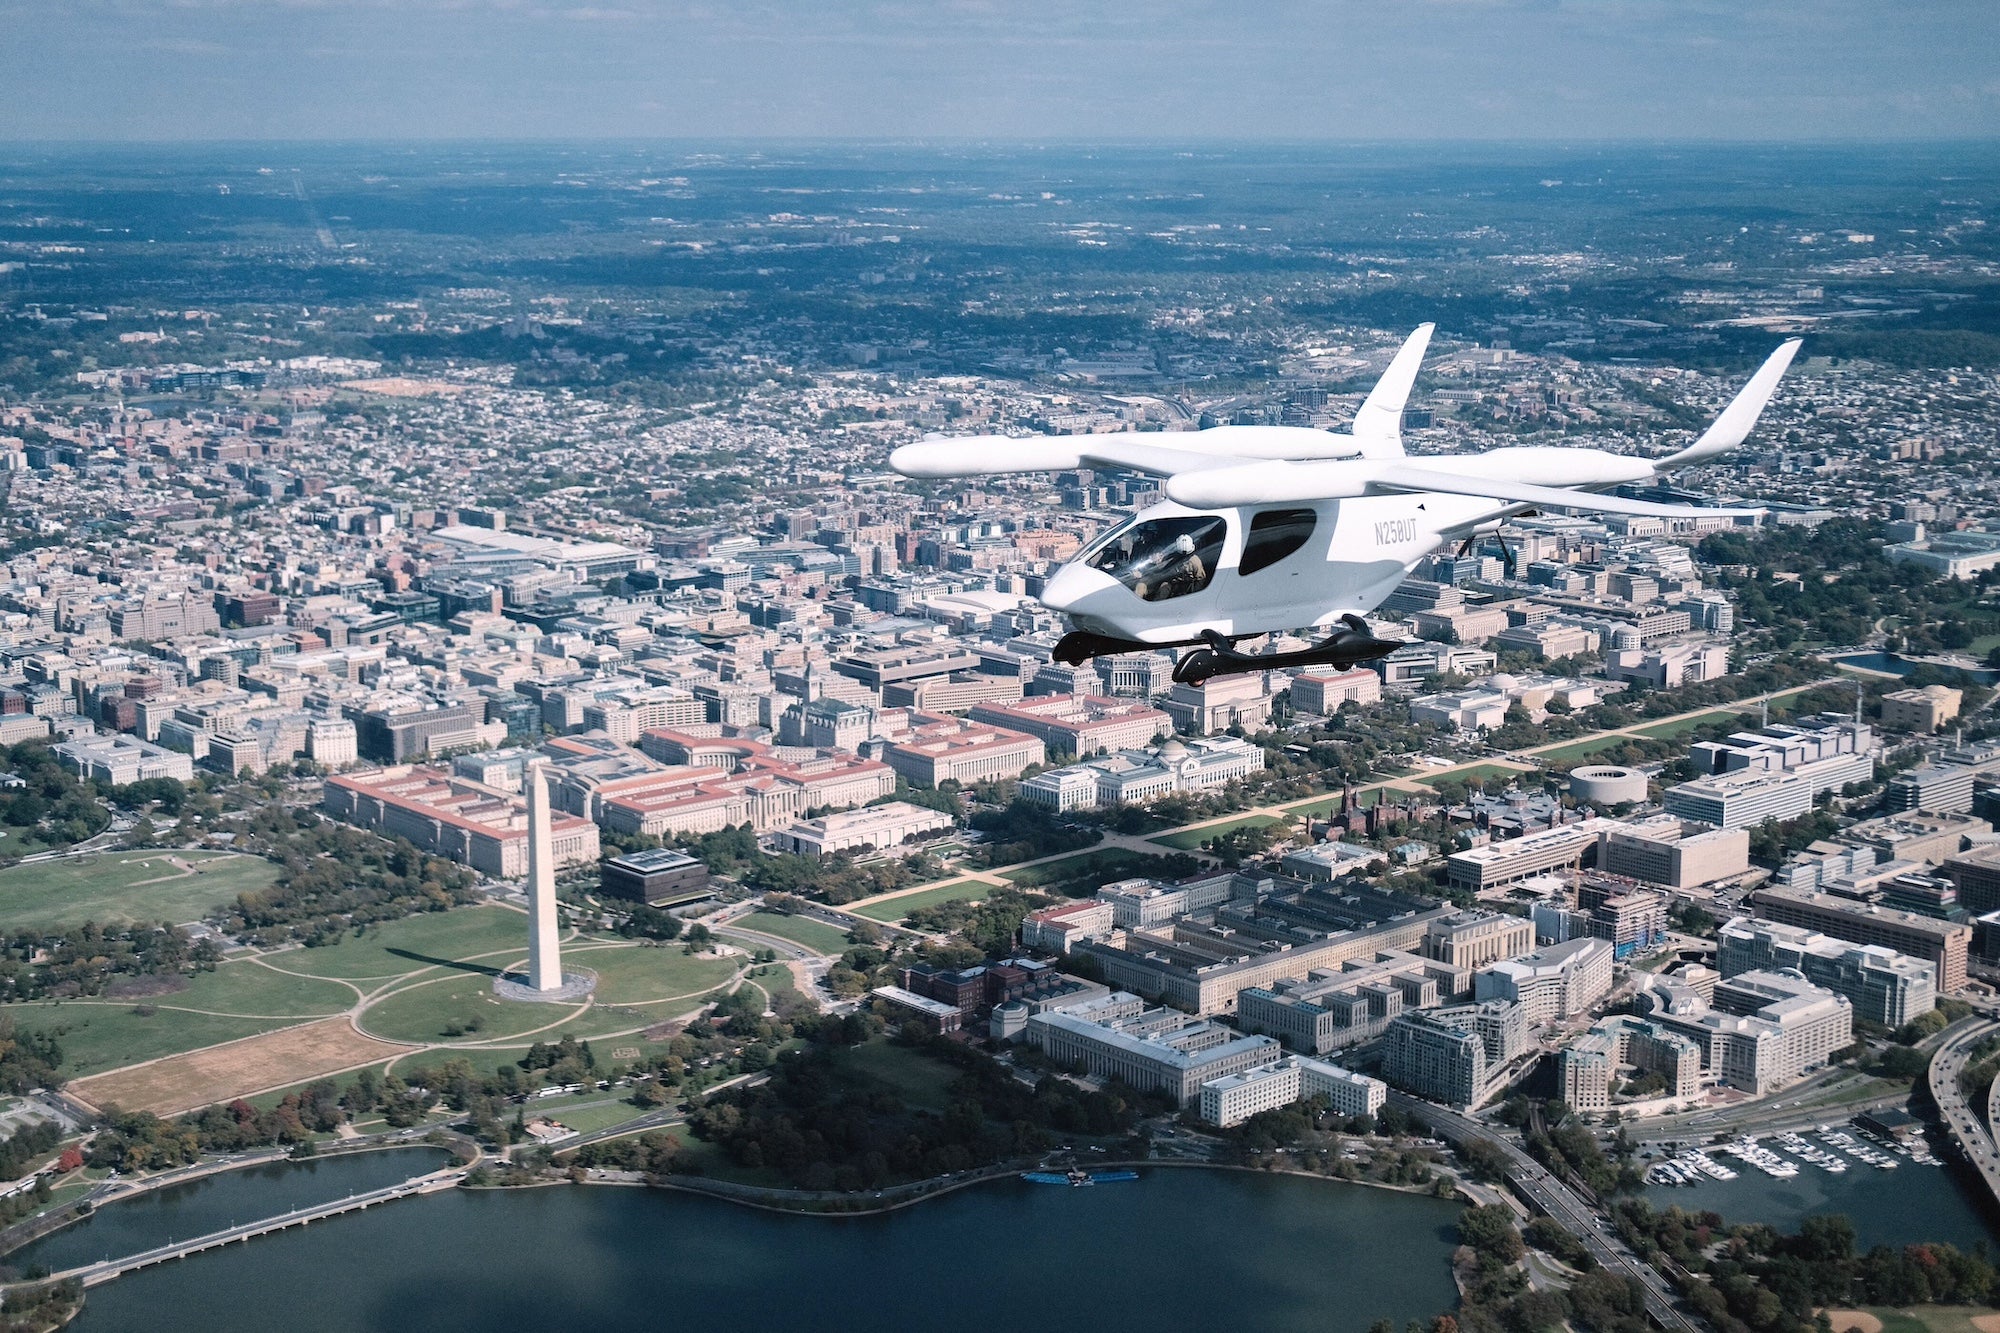 The Beta aircraft with the Washington Monument in the background.